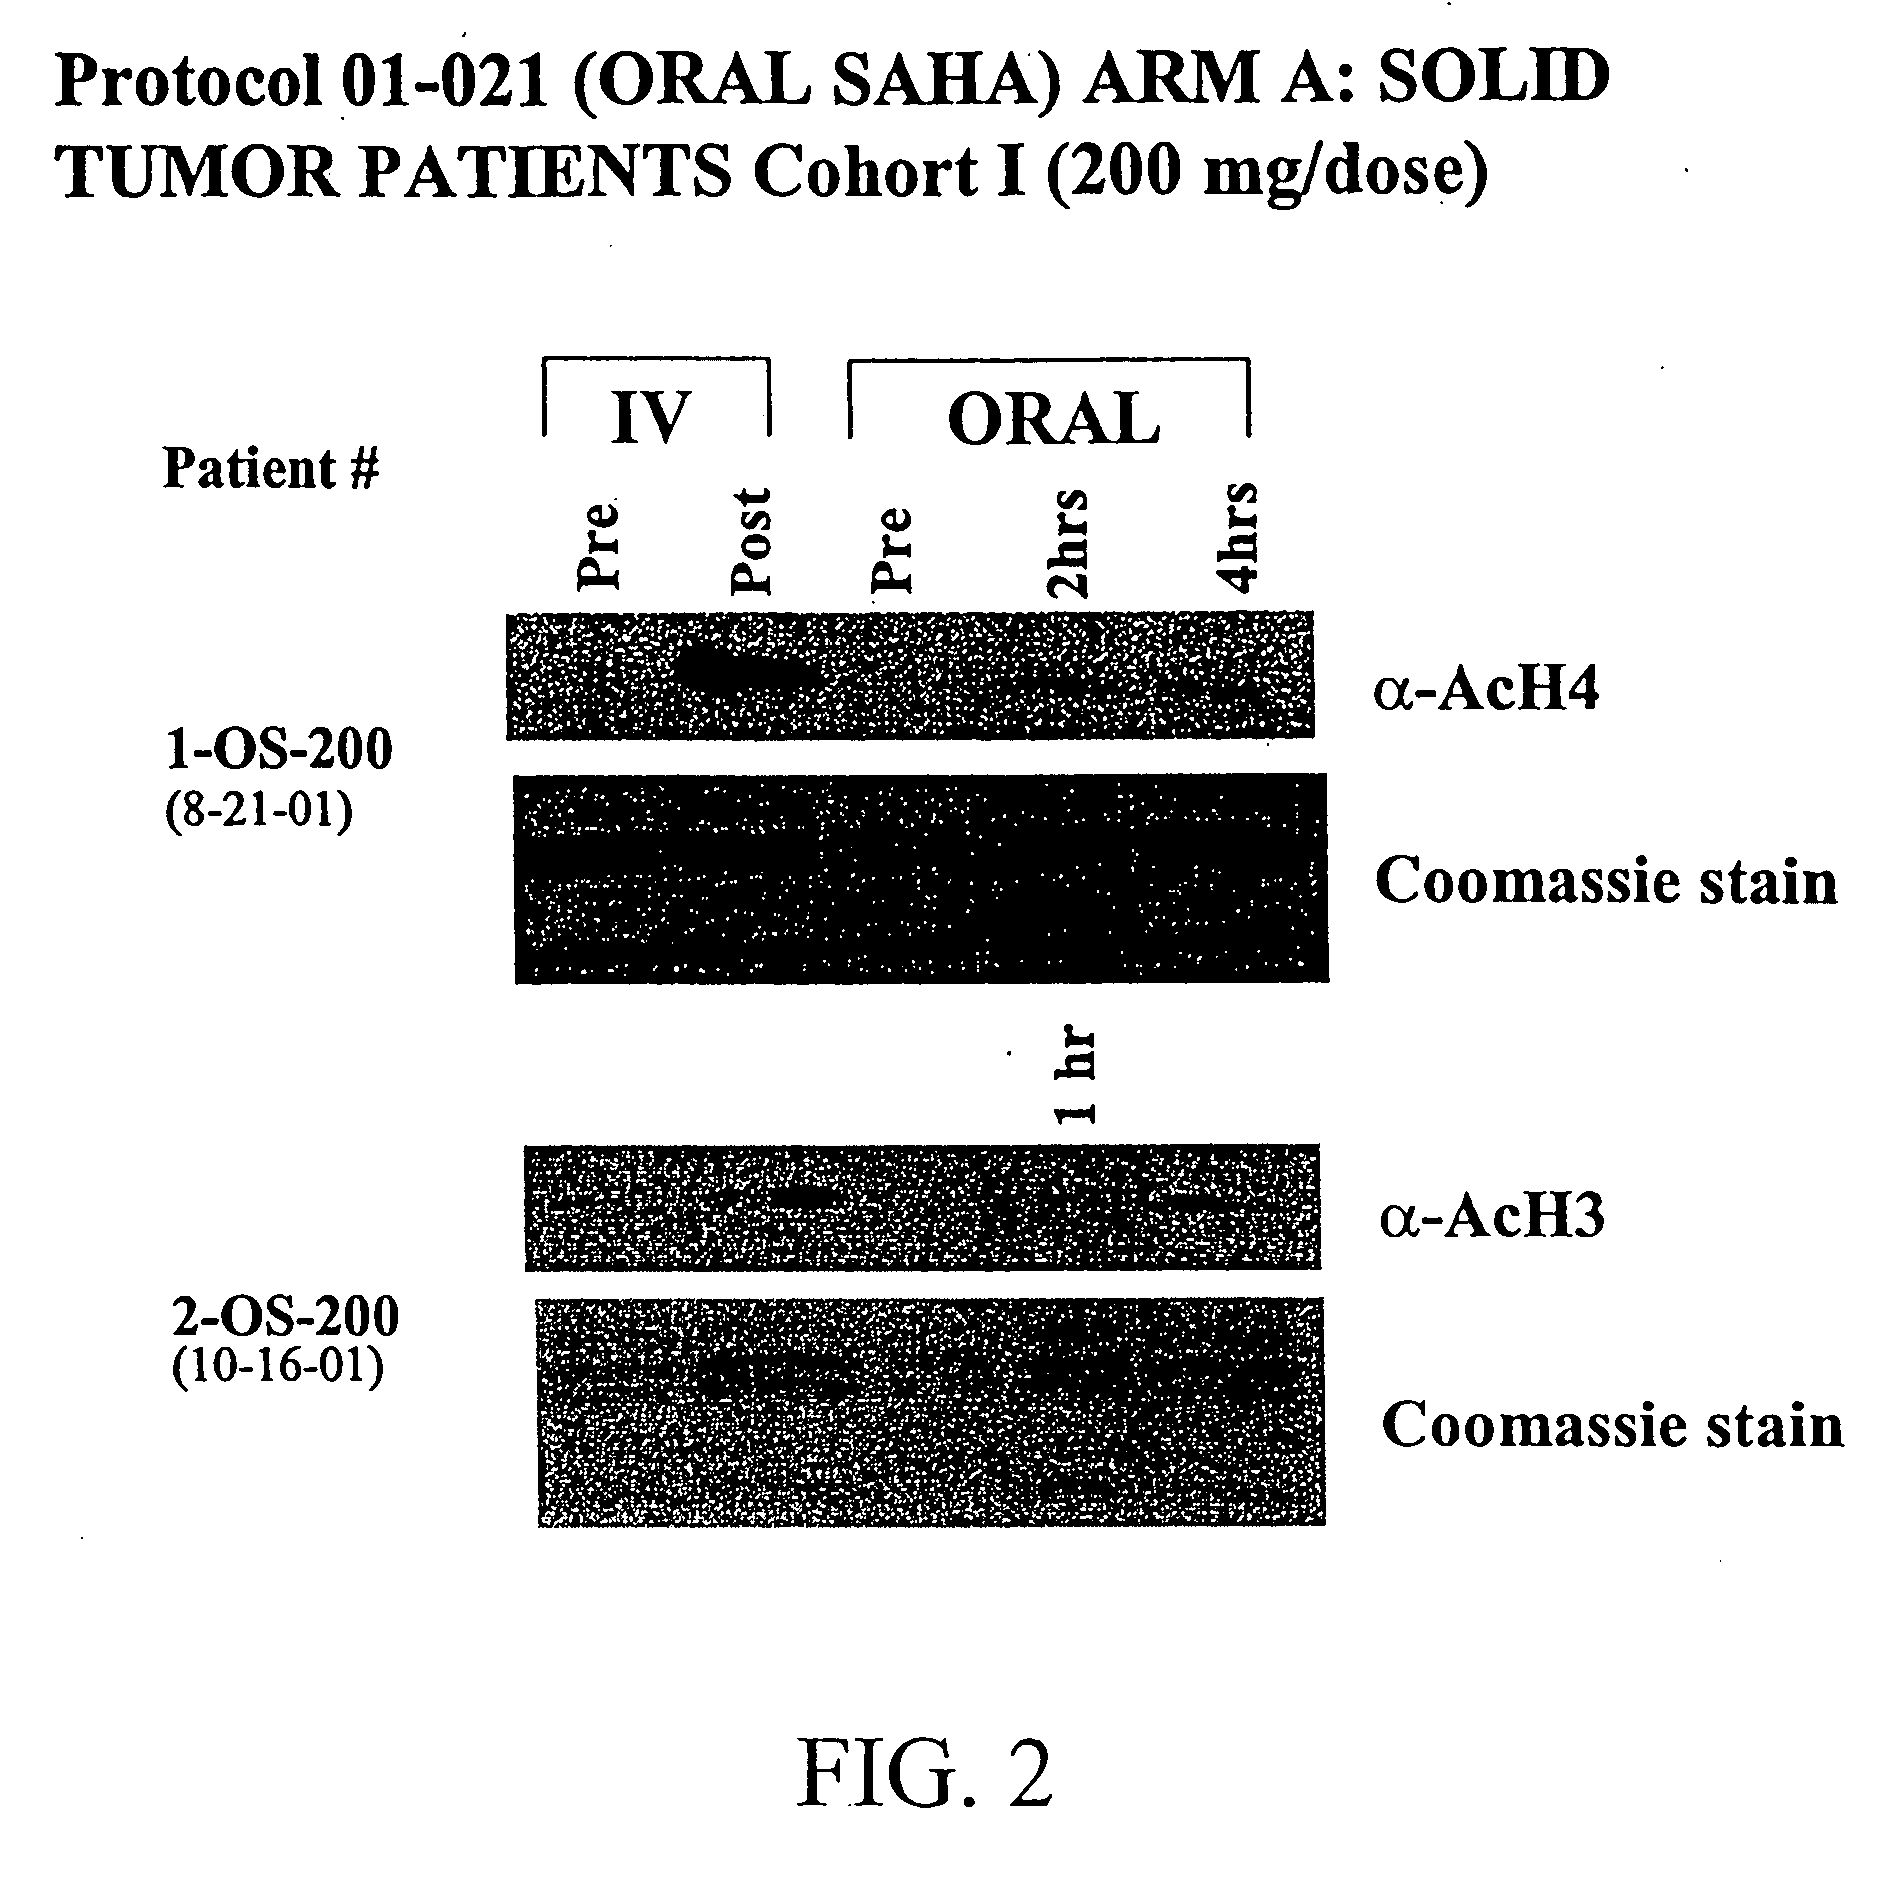 Methods of treating cancer with HDAC inhibitors